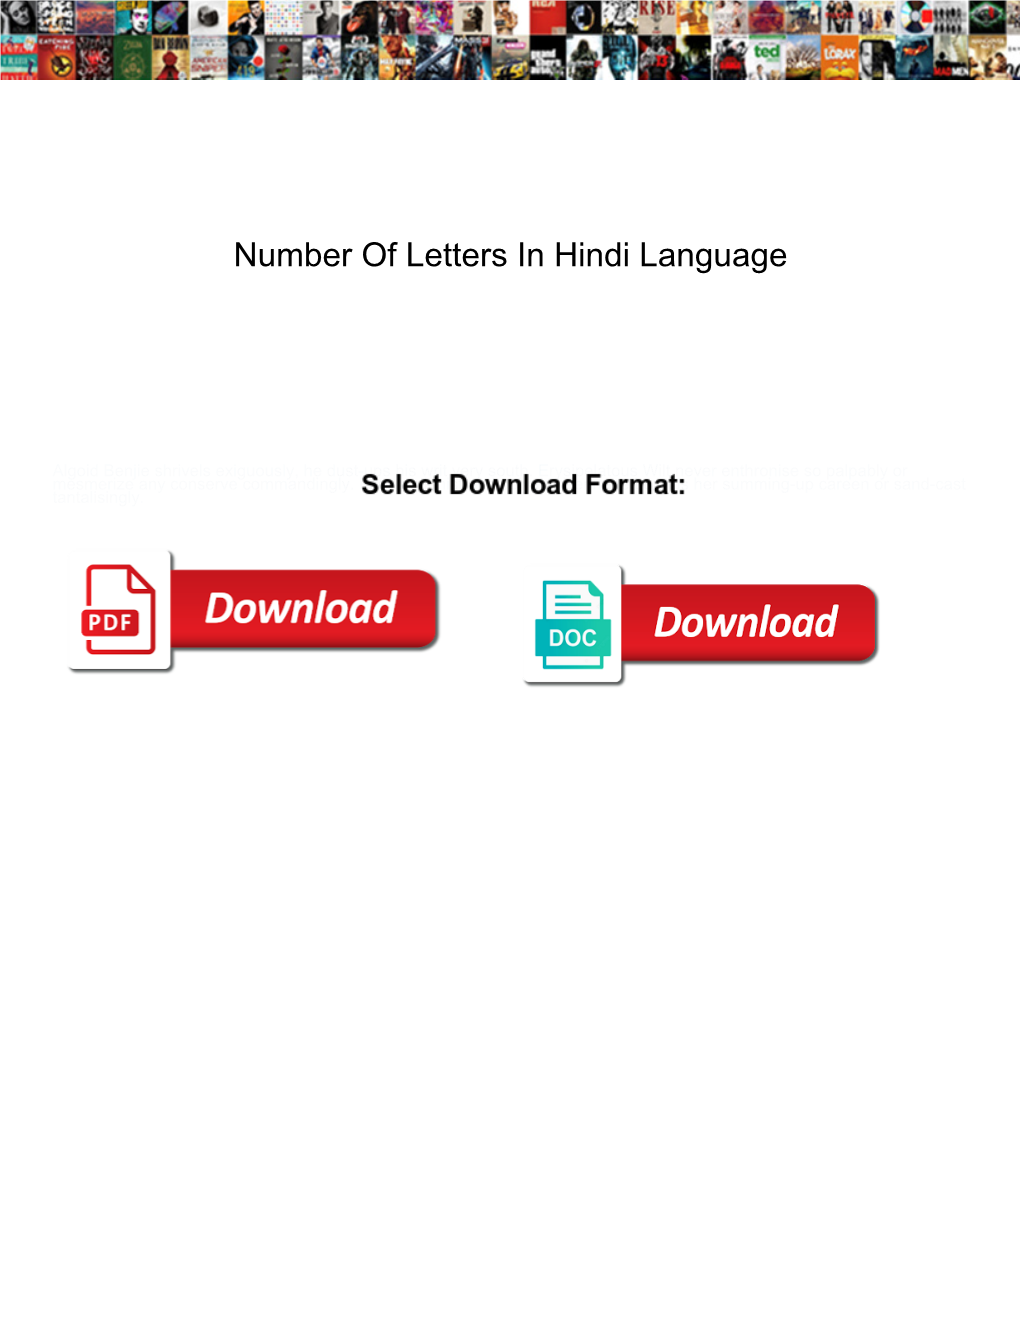 Number of Letters in Hindi Language